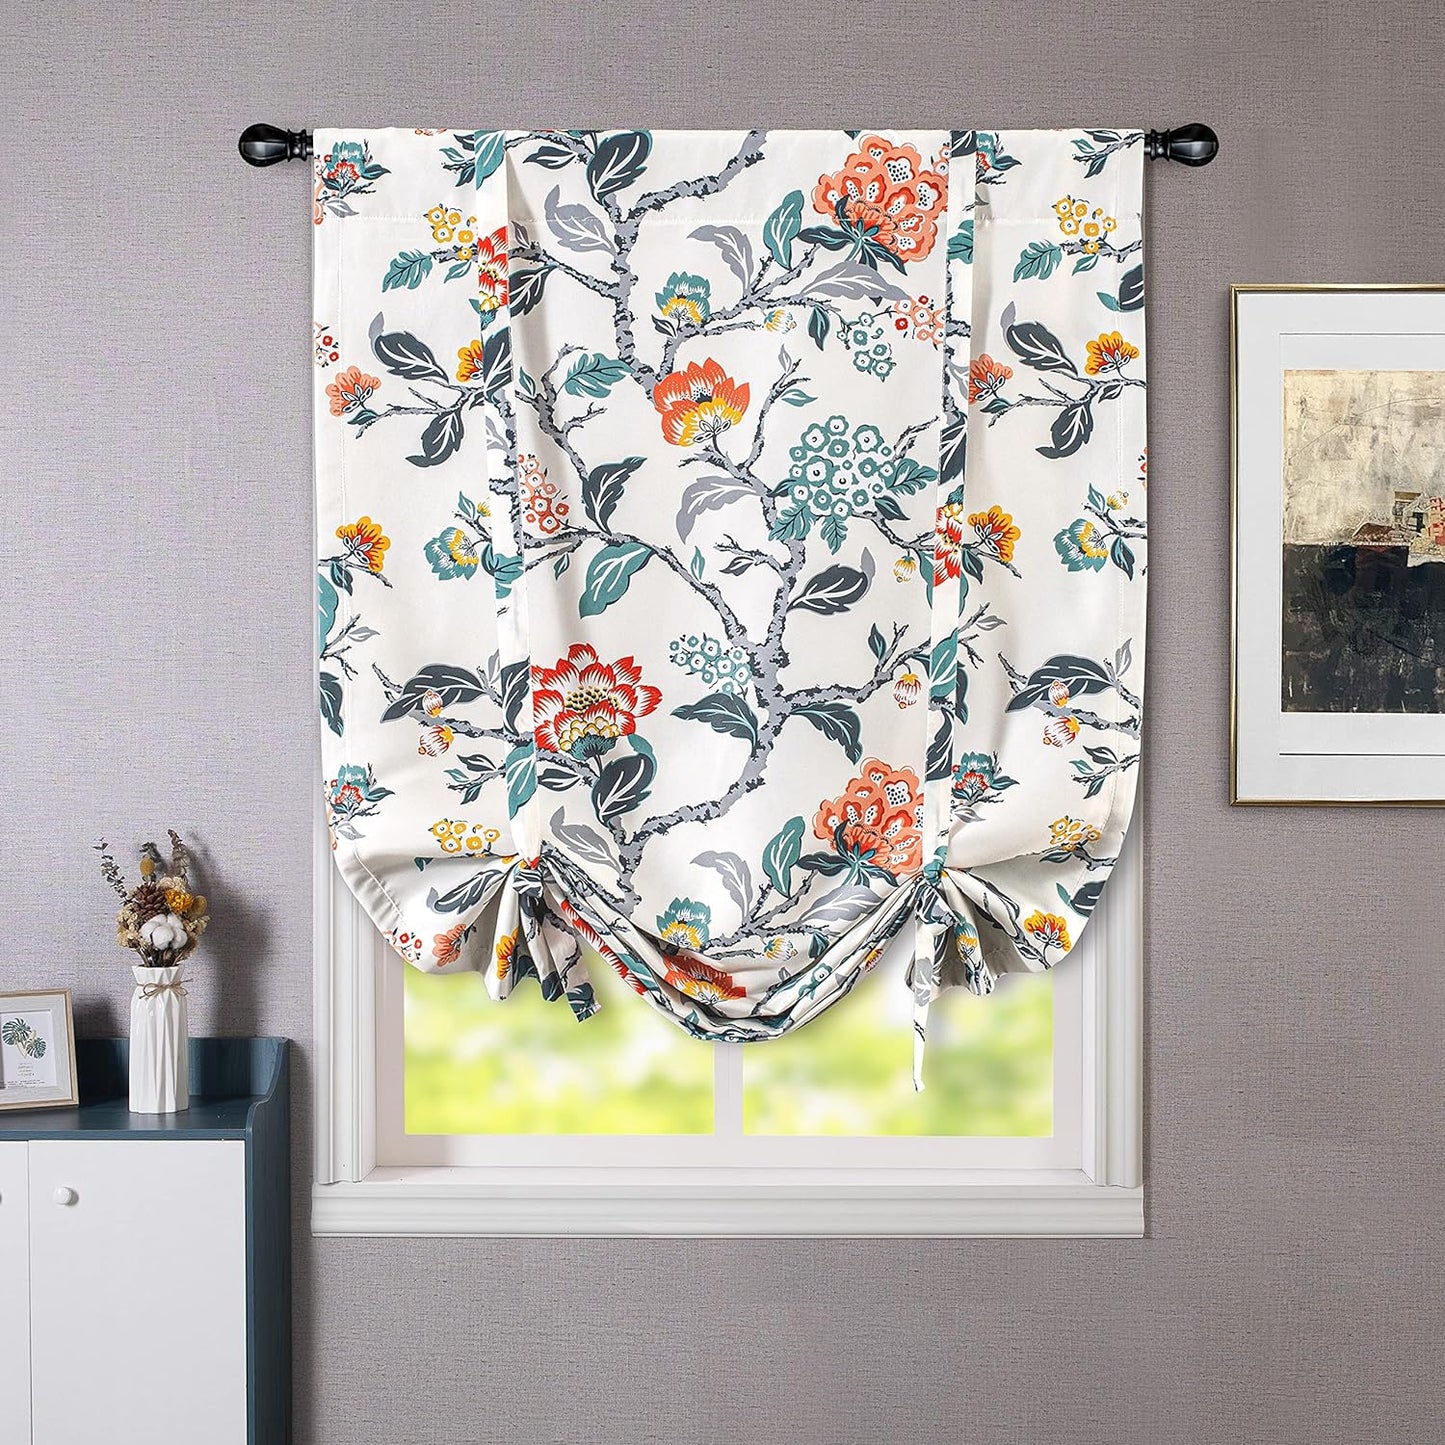 Driftaway Ada Botanical Print Lined Flower Leaf Tie up Curtain Thermal Insulated Privacy Blackout Window Adjustable Balloon Curtain Shade Rod Pocket Single 39 Inch by 55 Inch Ivory Orange Teal  DriftAway 1 31"X47" 